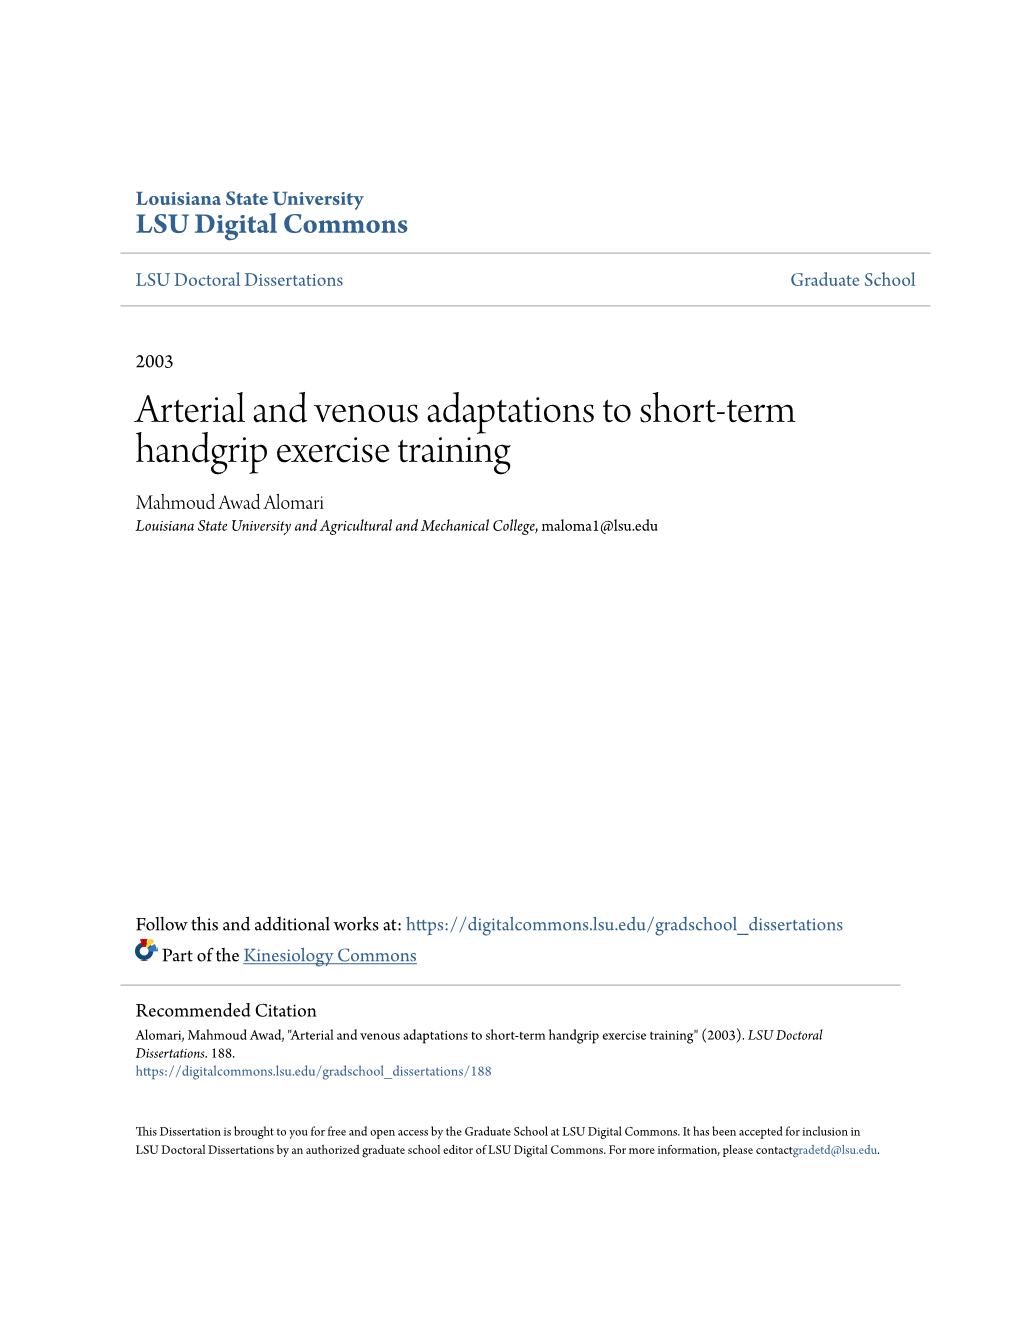 Arterial and Venous Adaptations to Short-Term Handgrip Exercise Training